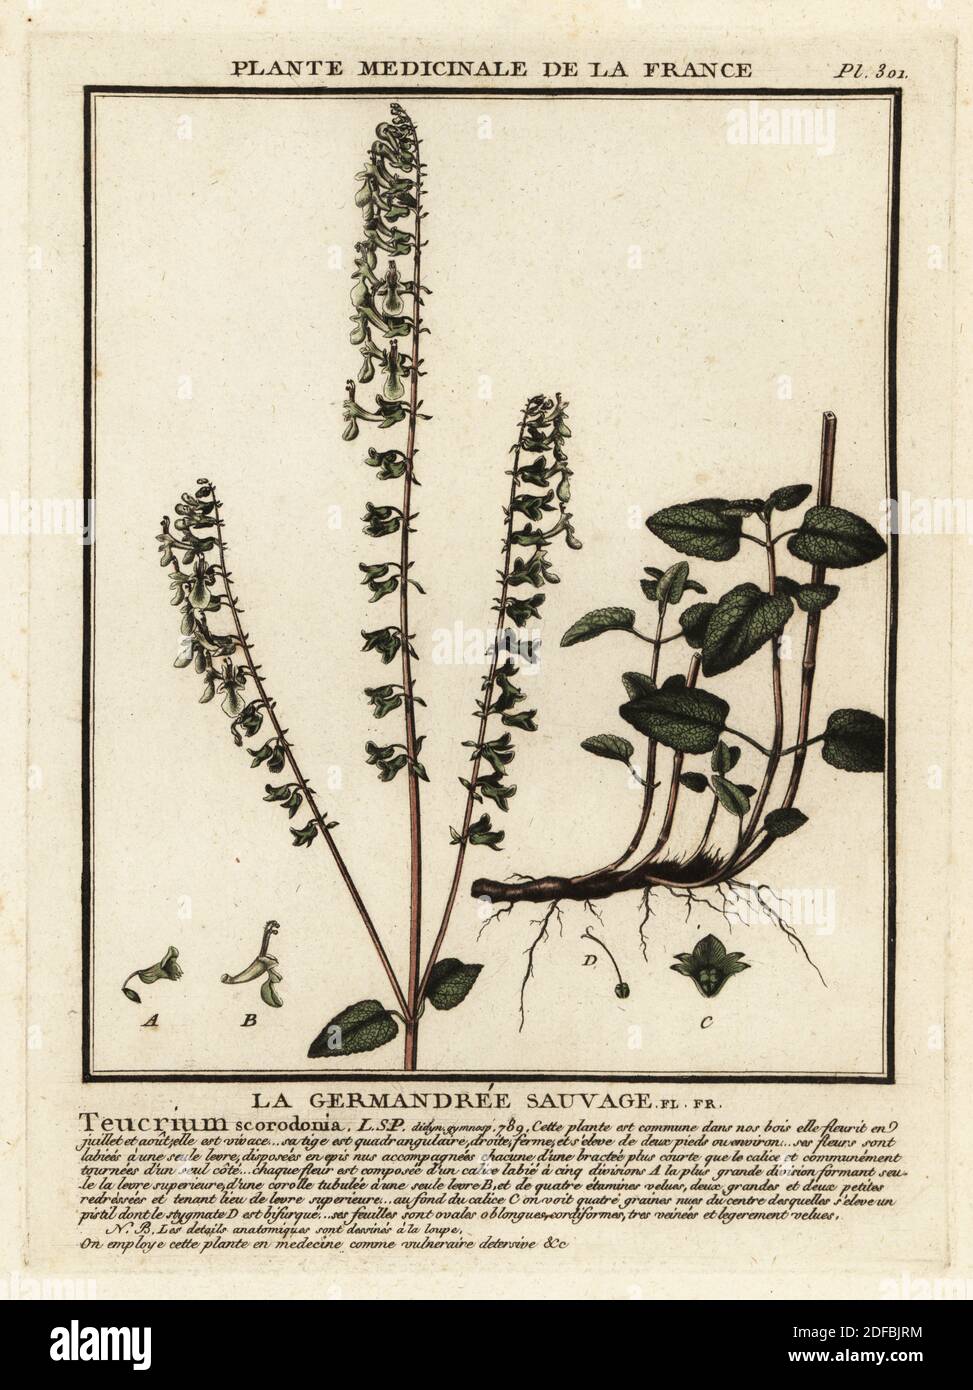 Woodland germander or wood sage, La germandree sauvage, Teucrium scorodonia. Copperplate engraving printed in three colours by Pierre Bulliard from his Herbier de la France, ou collection complete des plantes indigenes de ce royaume, Didot jeune, Debure et Belin, 1780-1793. Stock Photo